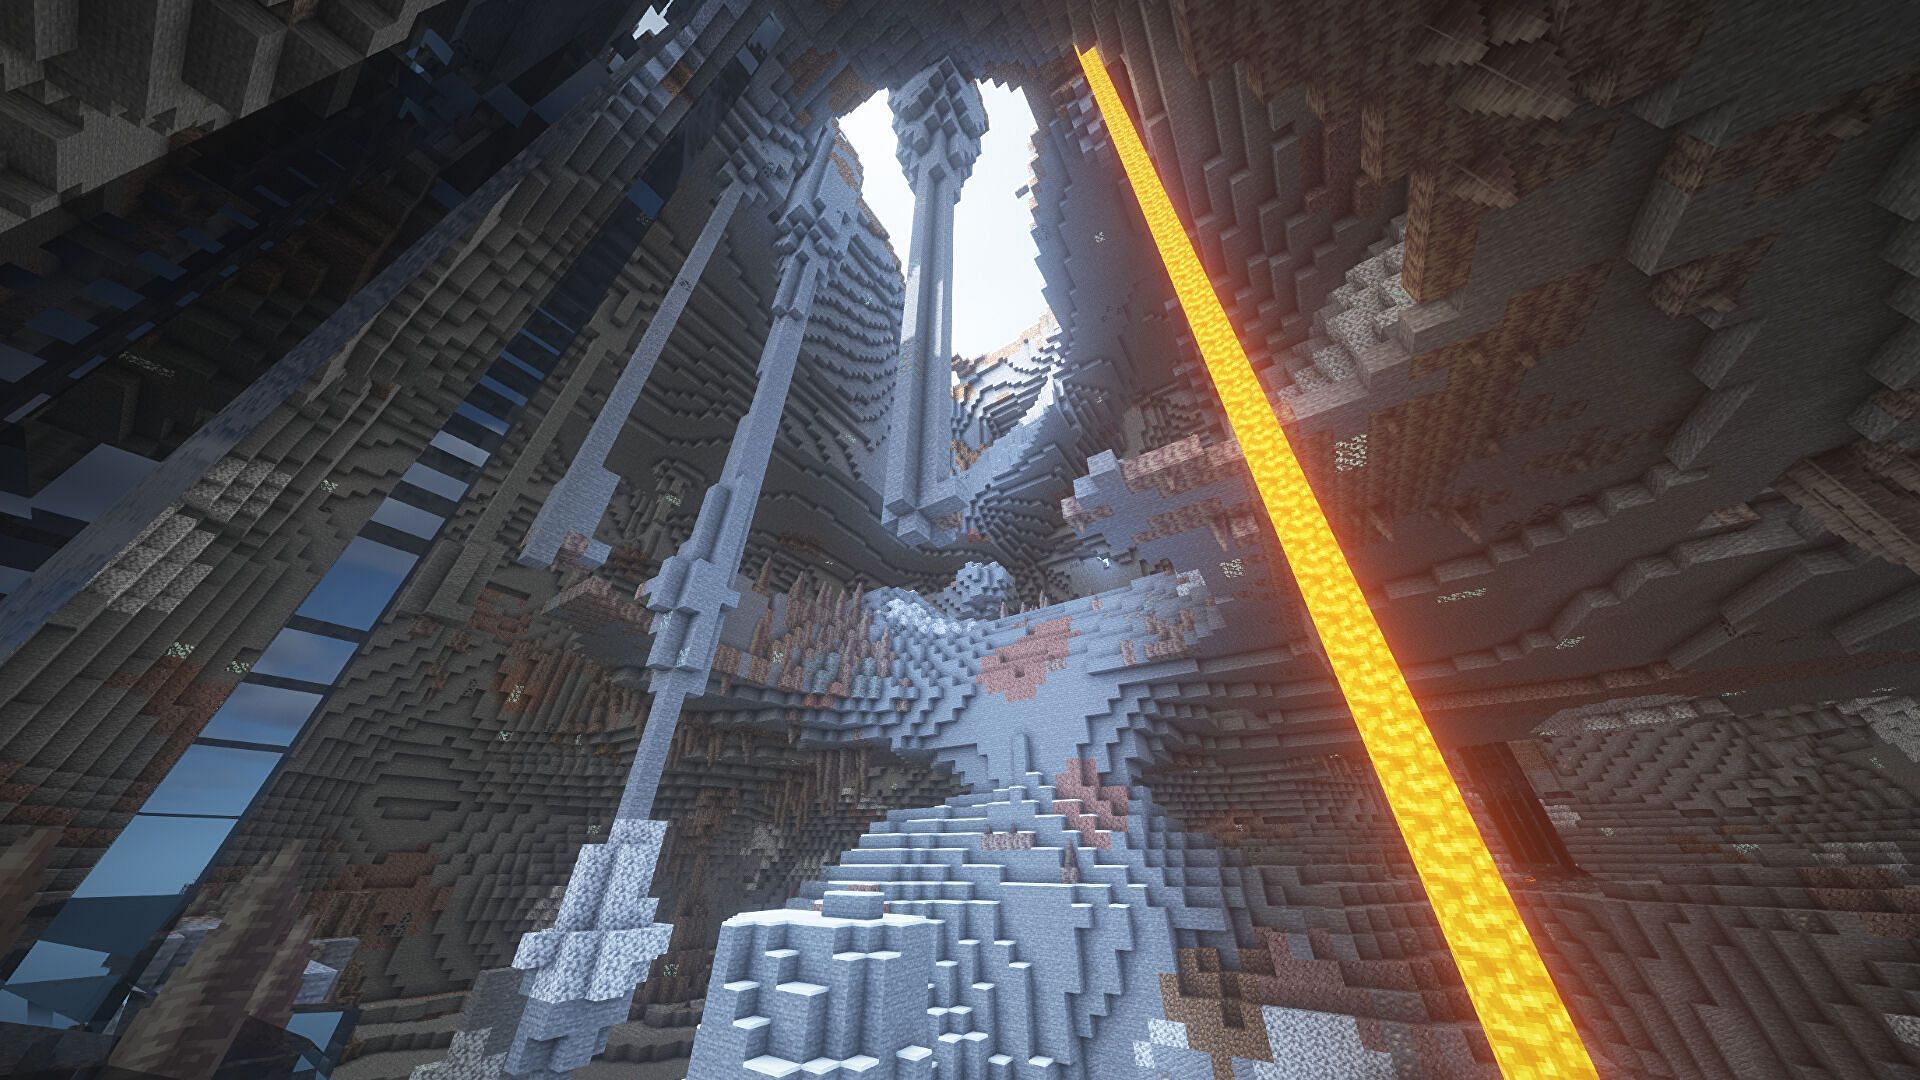 Players begin this seed in a considerably deep cave system (Image via Mojang)